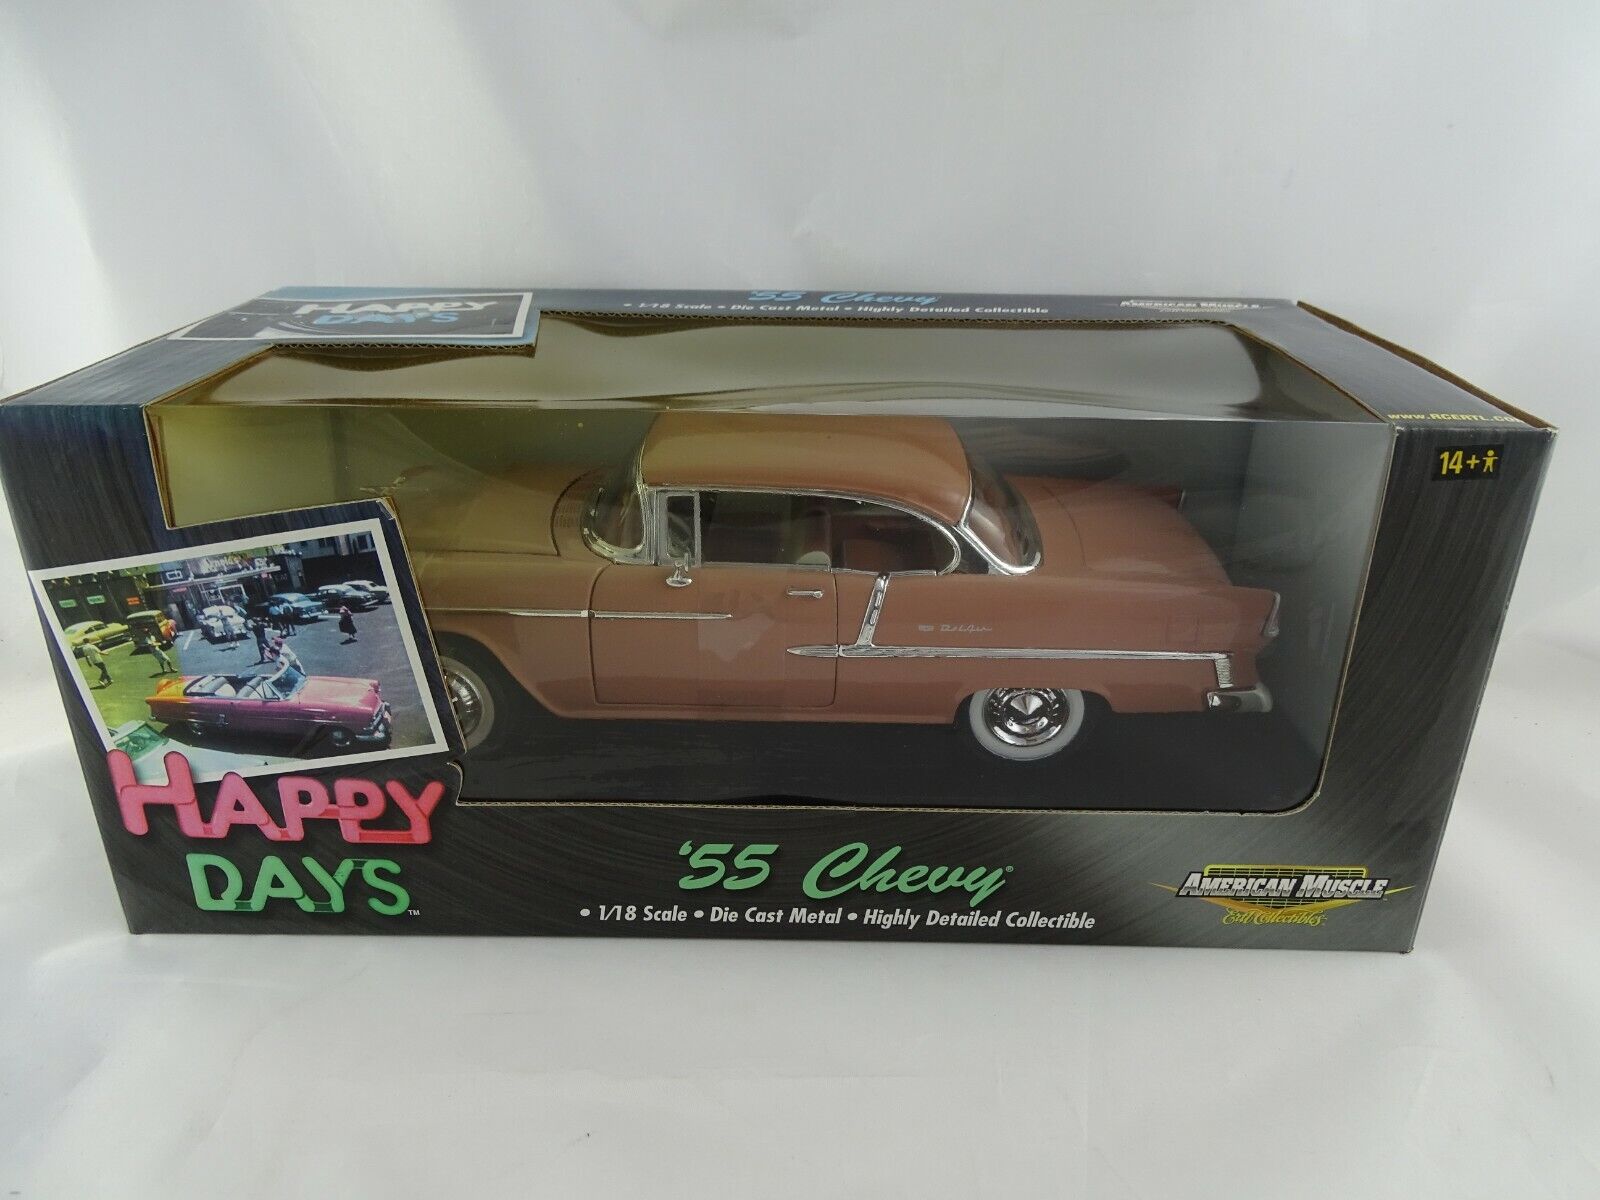 Hot Rod 55 Chevrolet impala Bel Air 1955 Chevy Gift Muscle Dad FREE SHIPPINGInsurance Anytime Ornament Fathers Day Birthday